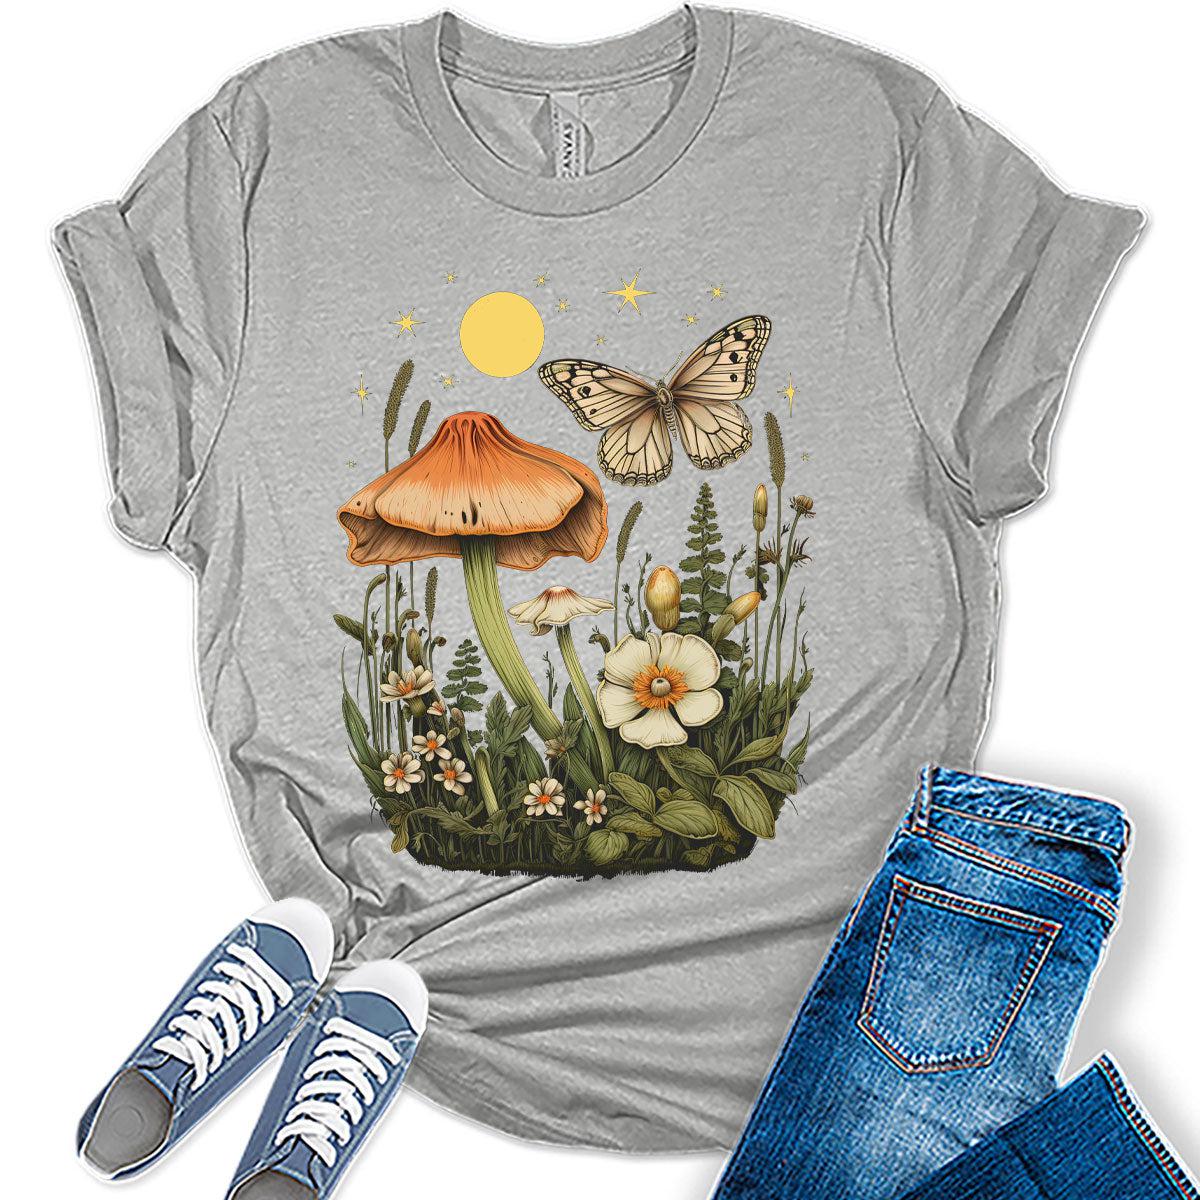 Graphic Tees for Women Short Sleeve Fall Tshirts,Womens Trendy Vintage Tops Crewneck Bella Cute Floral Wildflower Girls Shirts